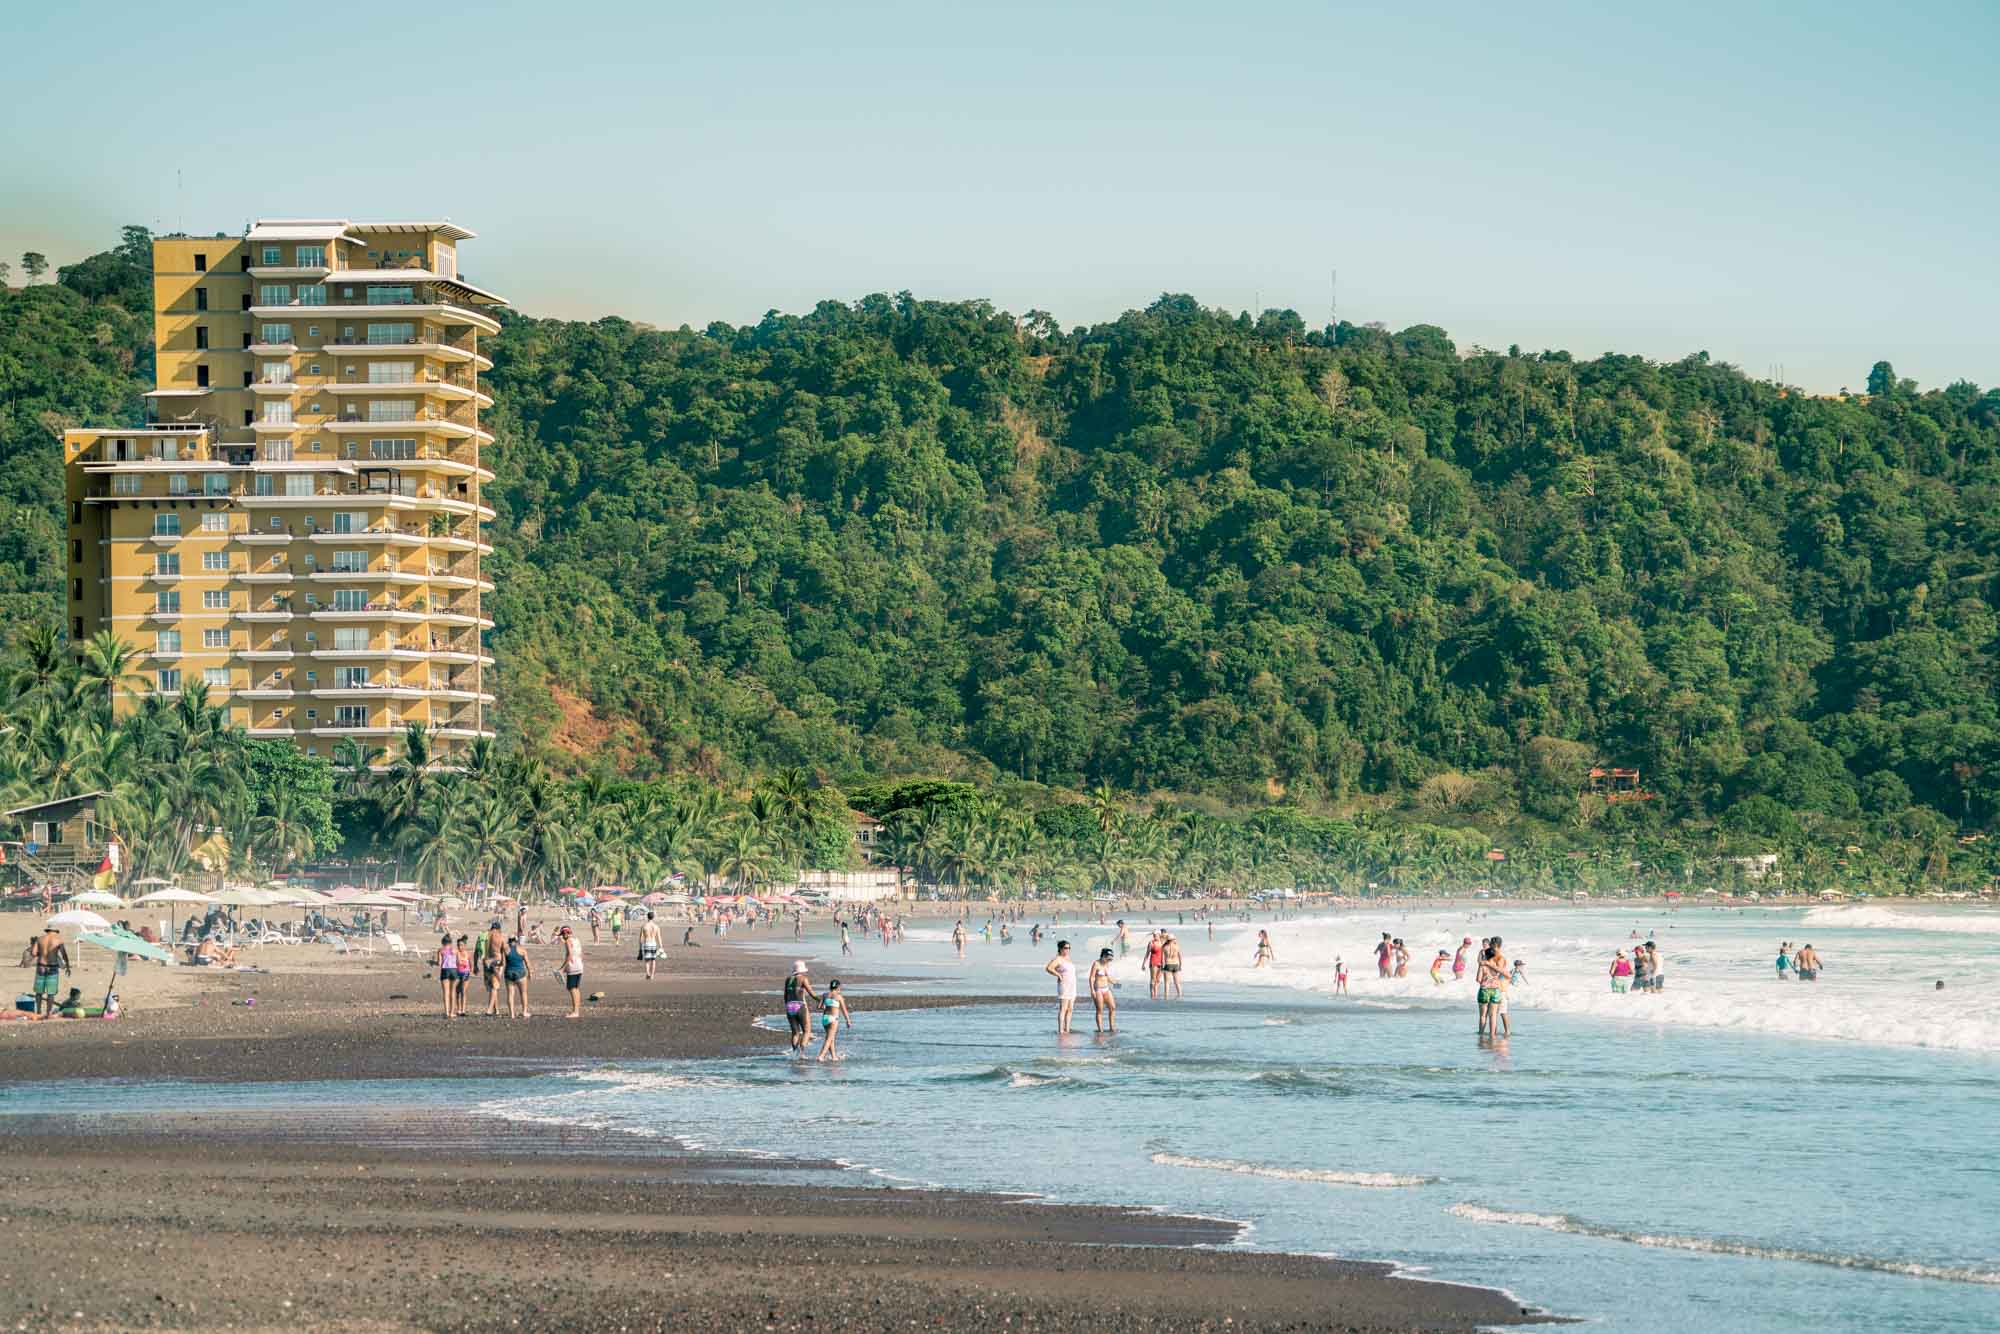 Things to do in Jaco, Costa Rica